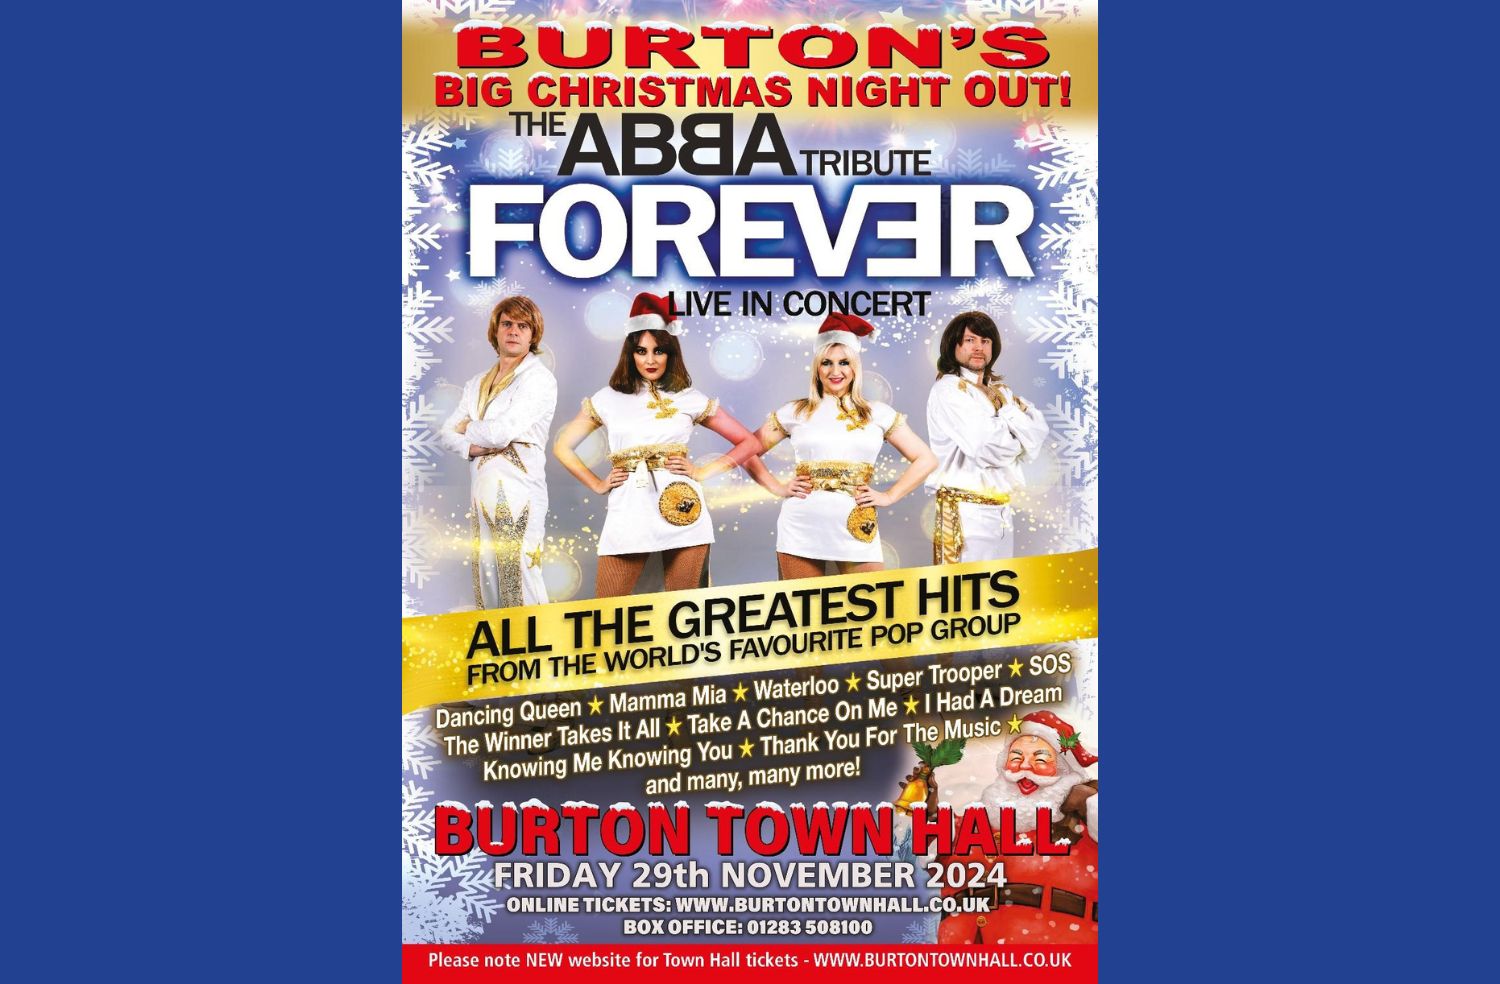 ABBA Forever - Burton's Big Christmas Night Out